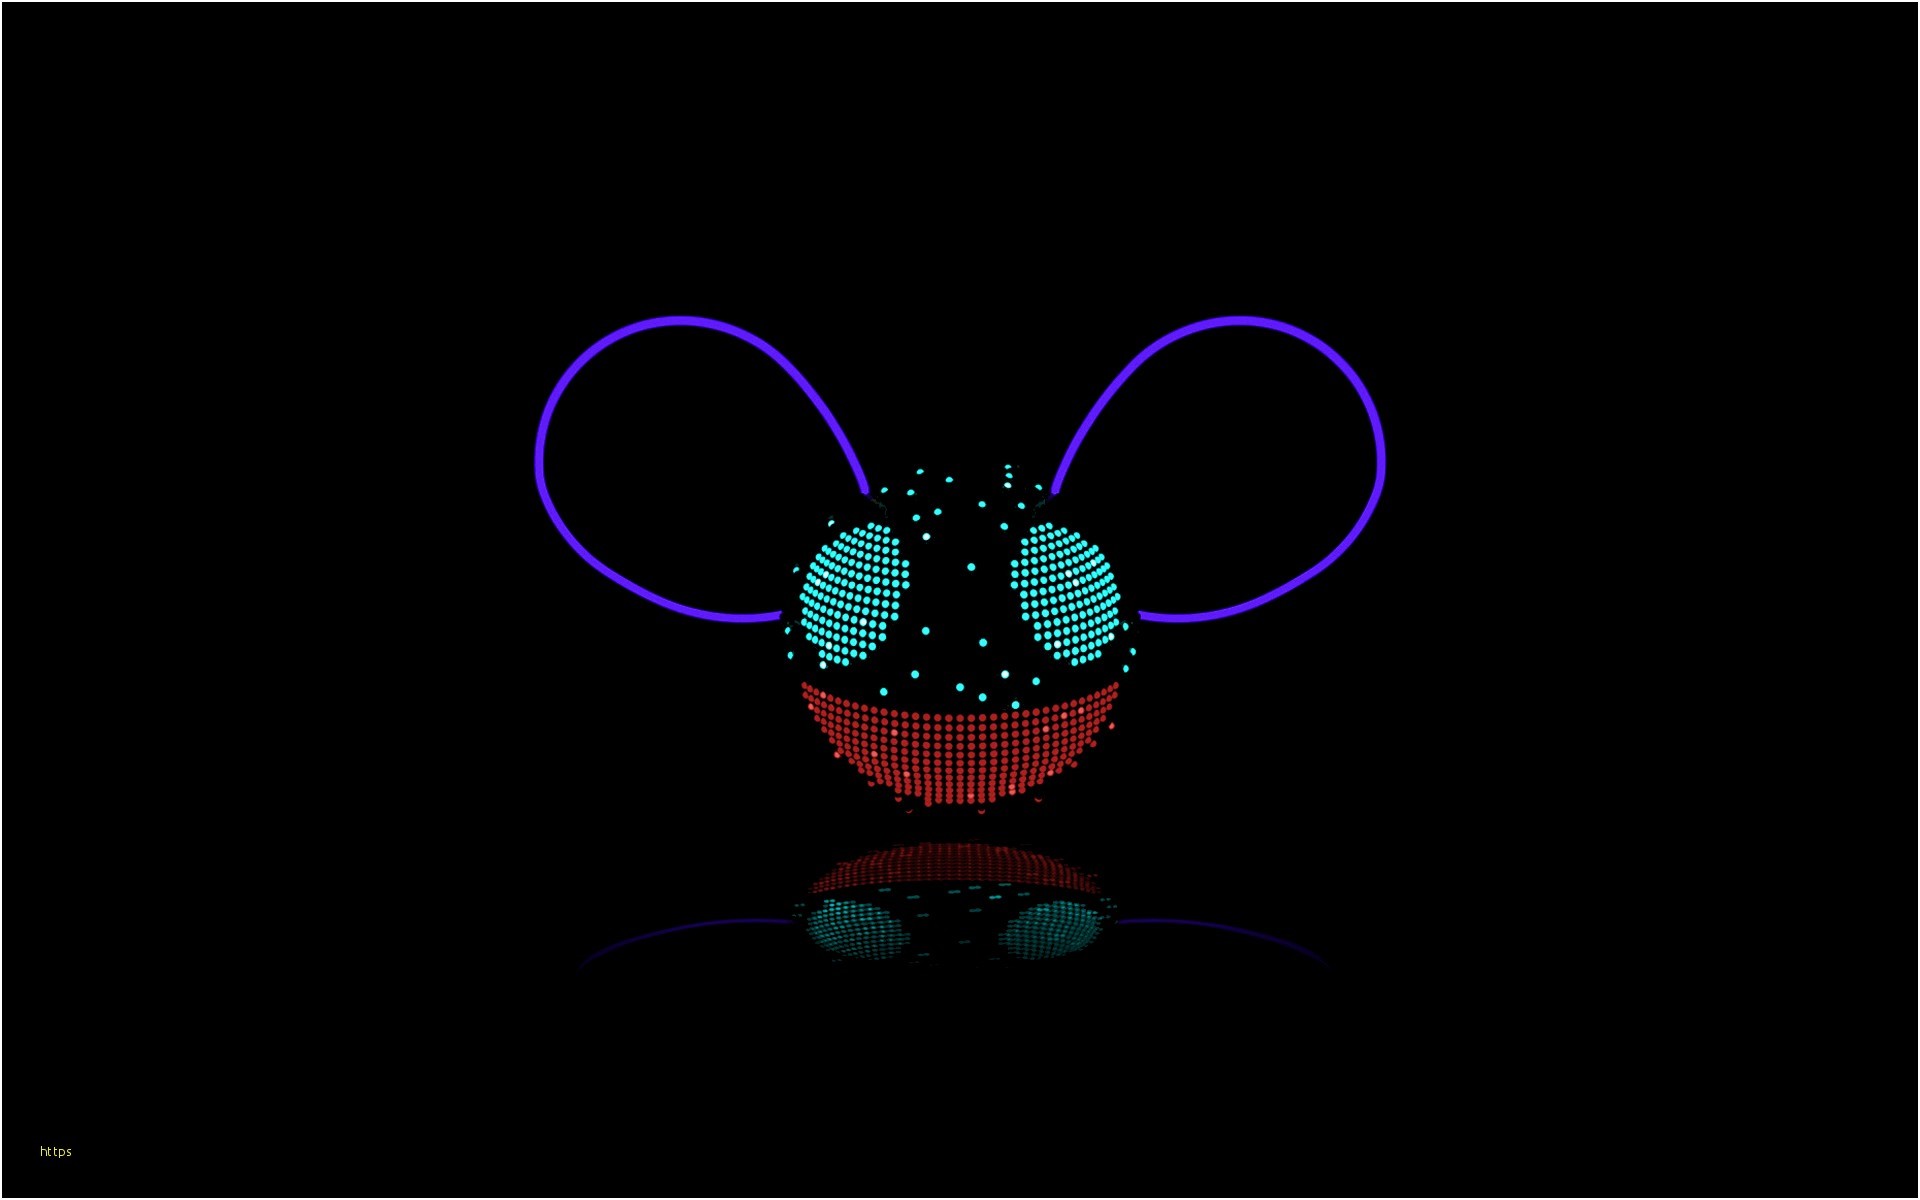 1920x1200 Dubstep Wallpapers Awesome Deadmau5 Wallpapers 2018 85 Background Pictures